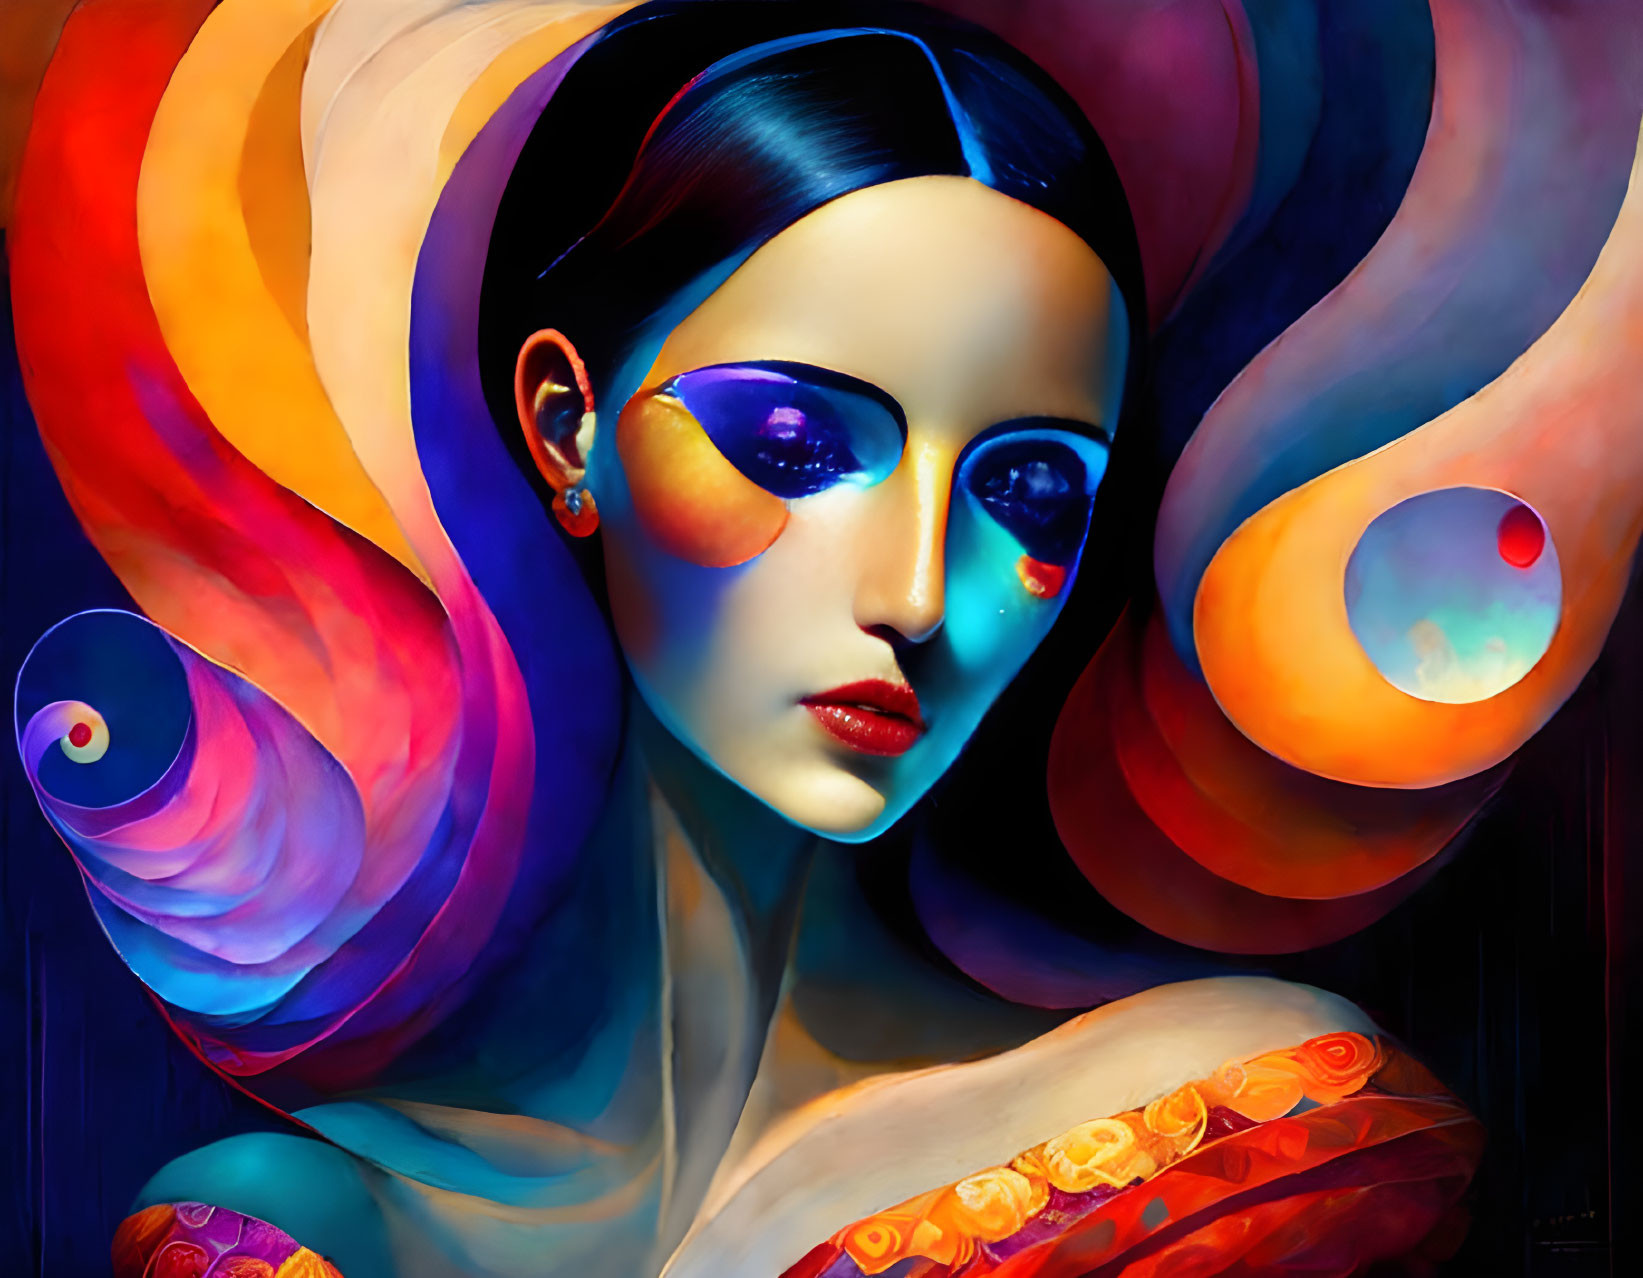 Vibrant Abstract Art: Woman with Flowing Shapes and Blue Eyeshadow